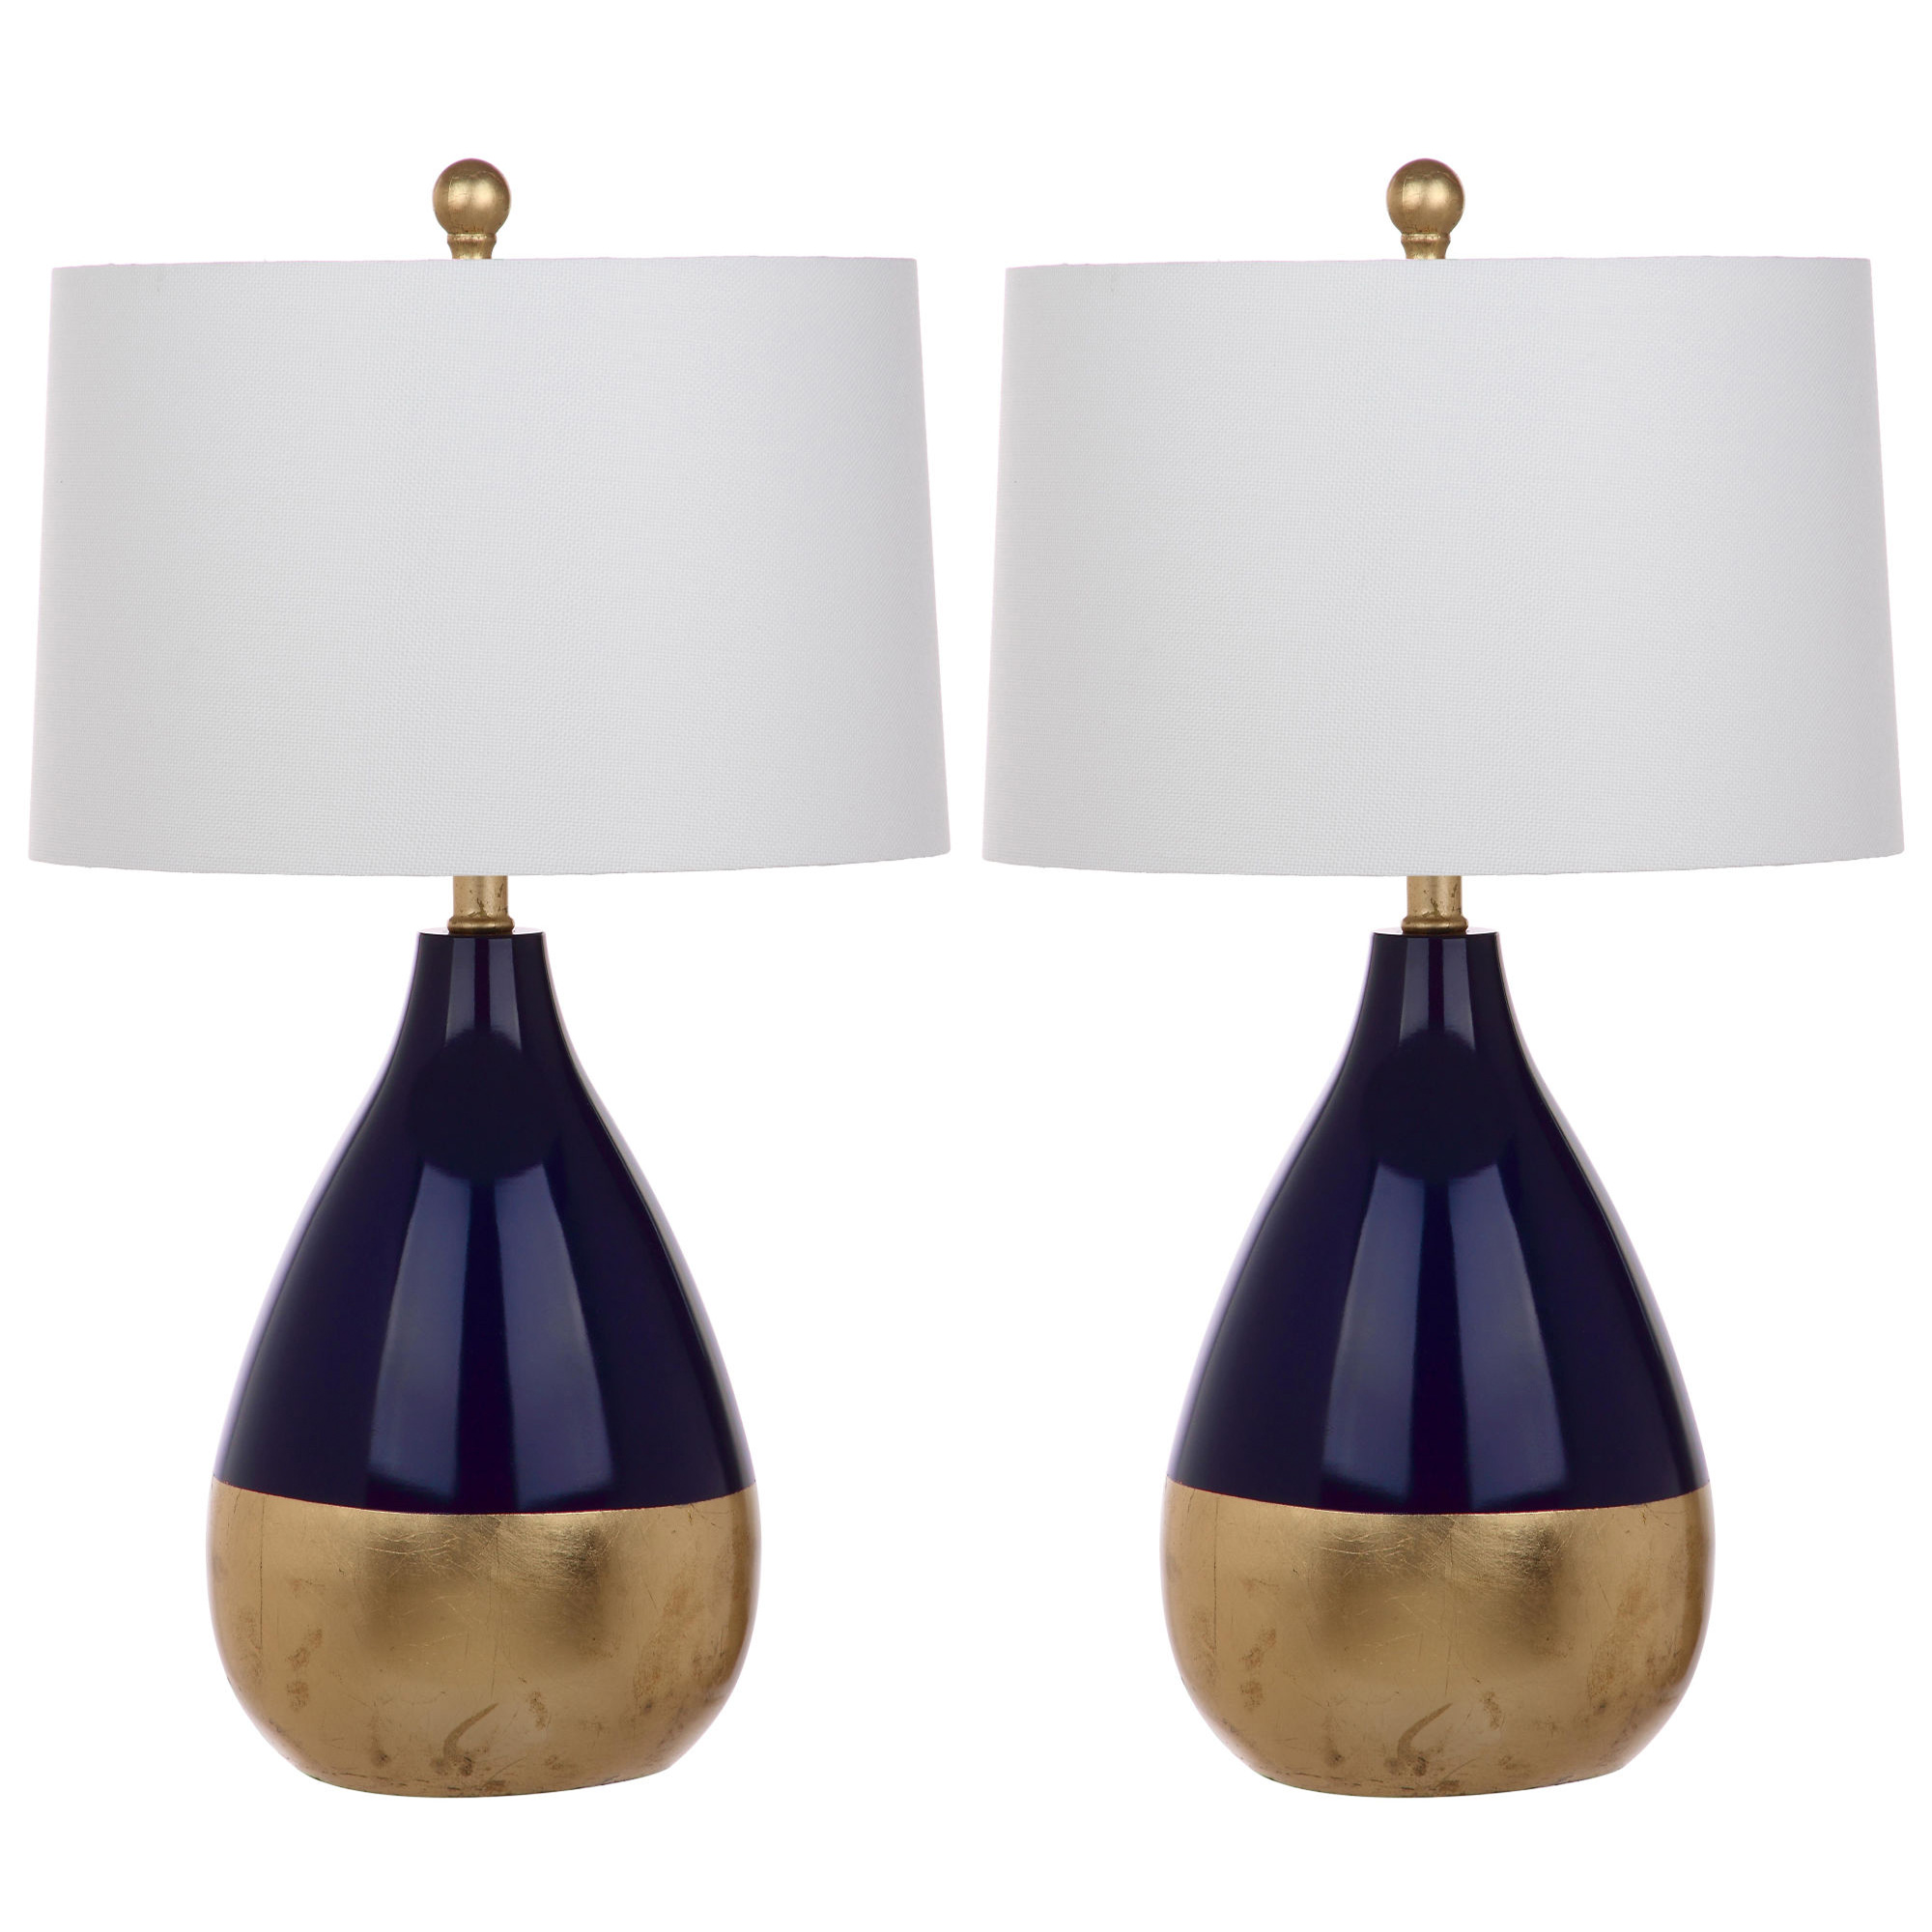 Kingship 24-Inch H Navy And Gold Table Lamp in Navy/Gold by Safavieh